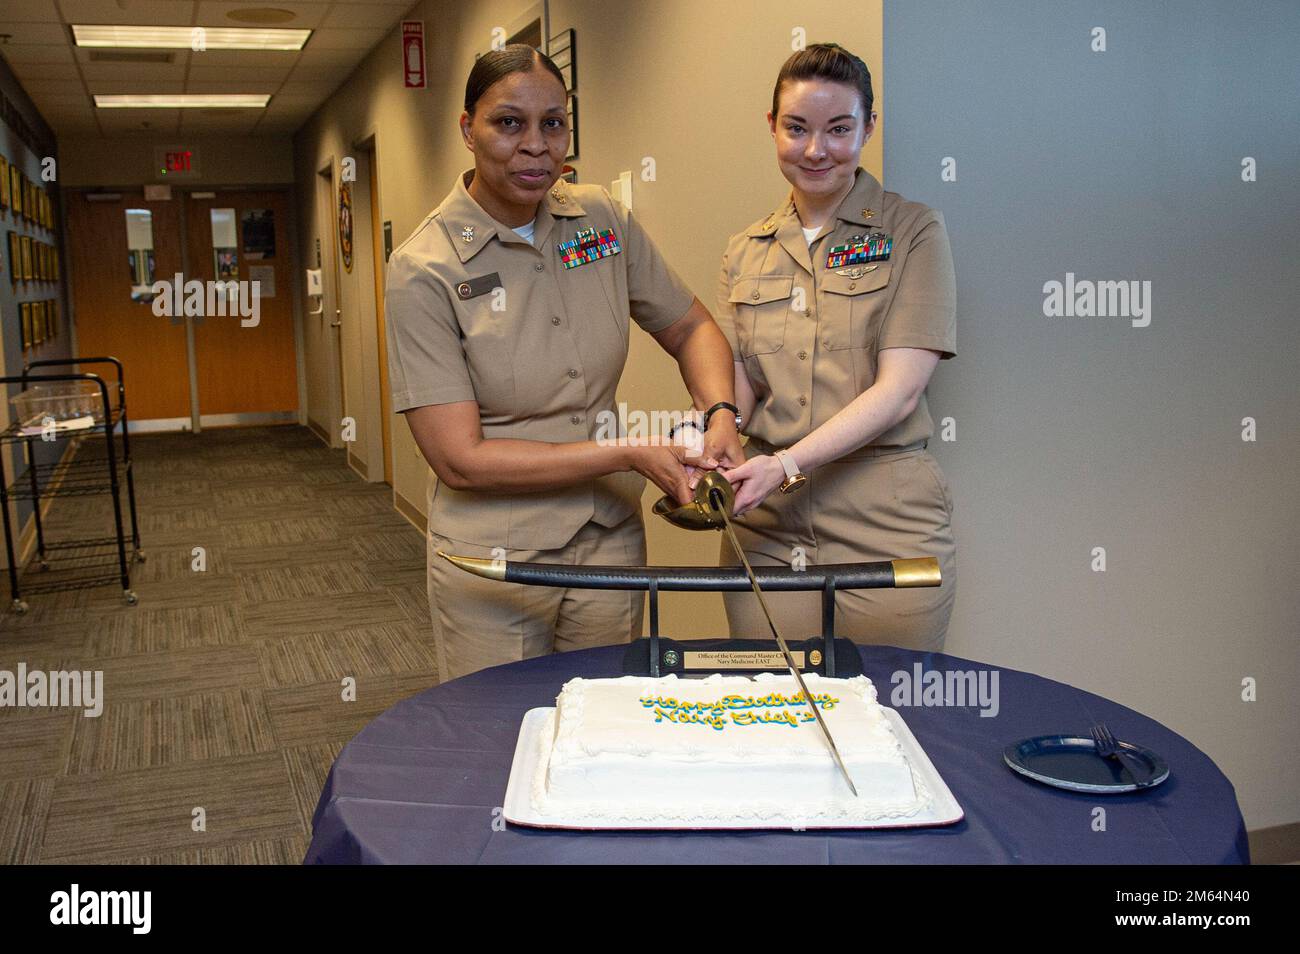 Portsmouth, Va. (Apr. 1, 2022) Master Chief Teresa Carr, left, and Chief Logistics Specialist Samantha VanWhy, assigned to Naval Medical Forces Atlantic, cut cake during the 129th Chief Petty Officer birthday celebration held on the 13th floor in Naval Medical Center Portsmouth April 1, 2022. Naval Medical Forces Atlantic, headquartered in Portsmouth, Virginia, provides well-trained medical experts, operating as high performance teams, to project medical power in support of naval superiority. Stock Photo